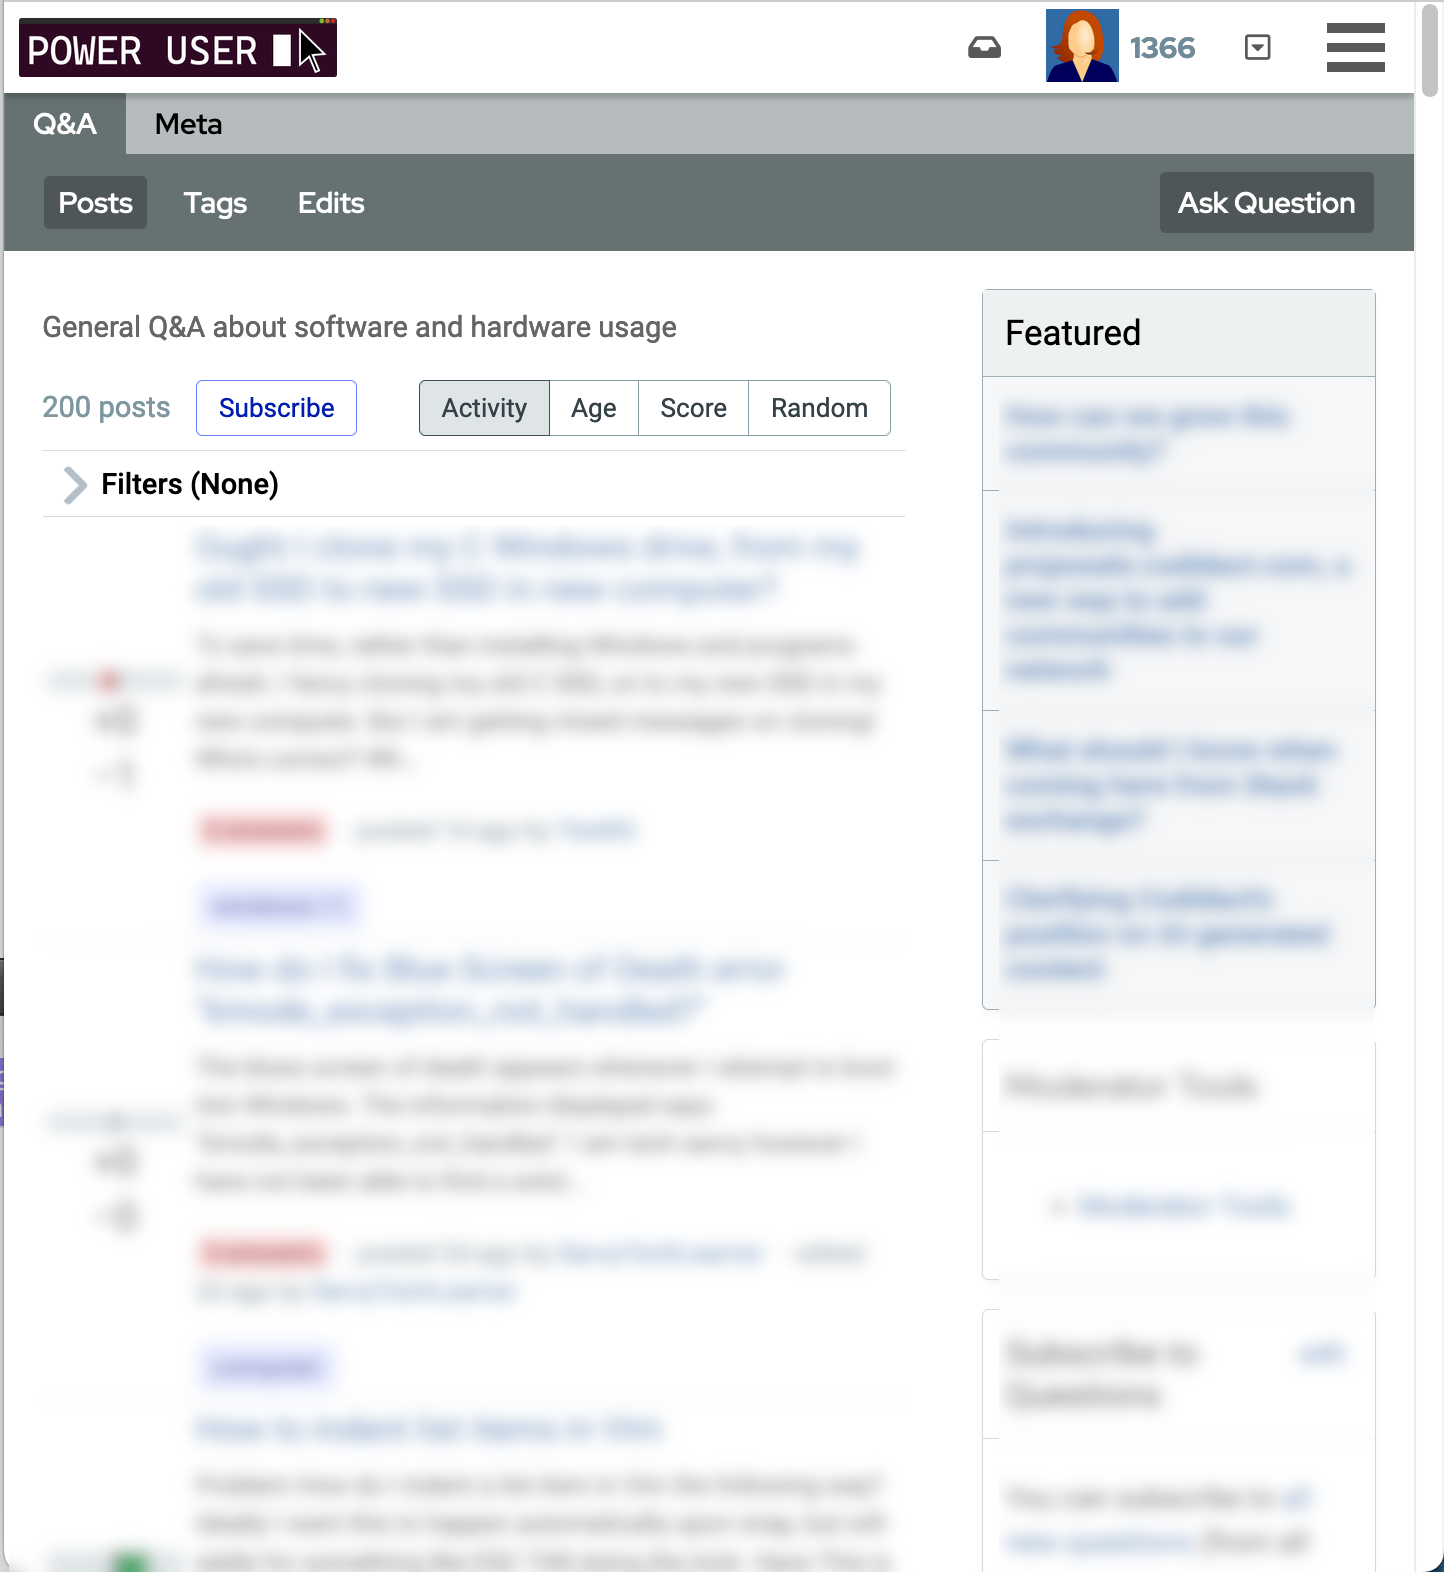 Screenshot of the Power Users front page showing a very narrow main column